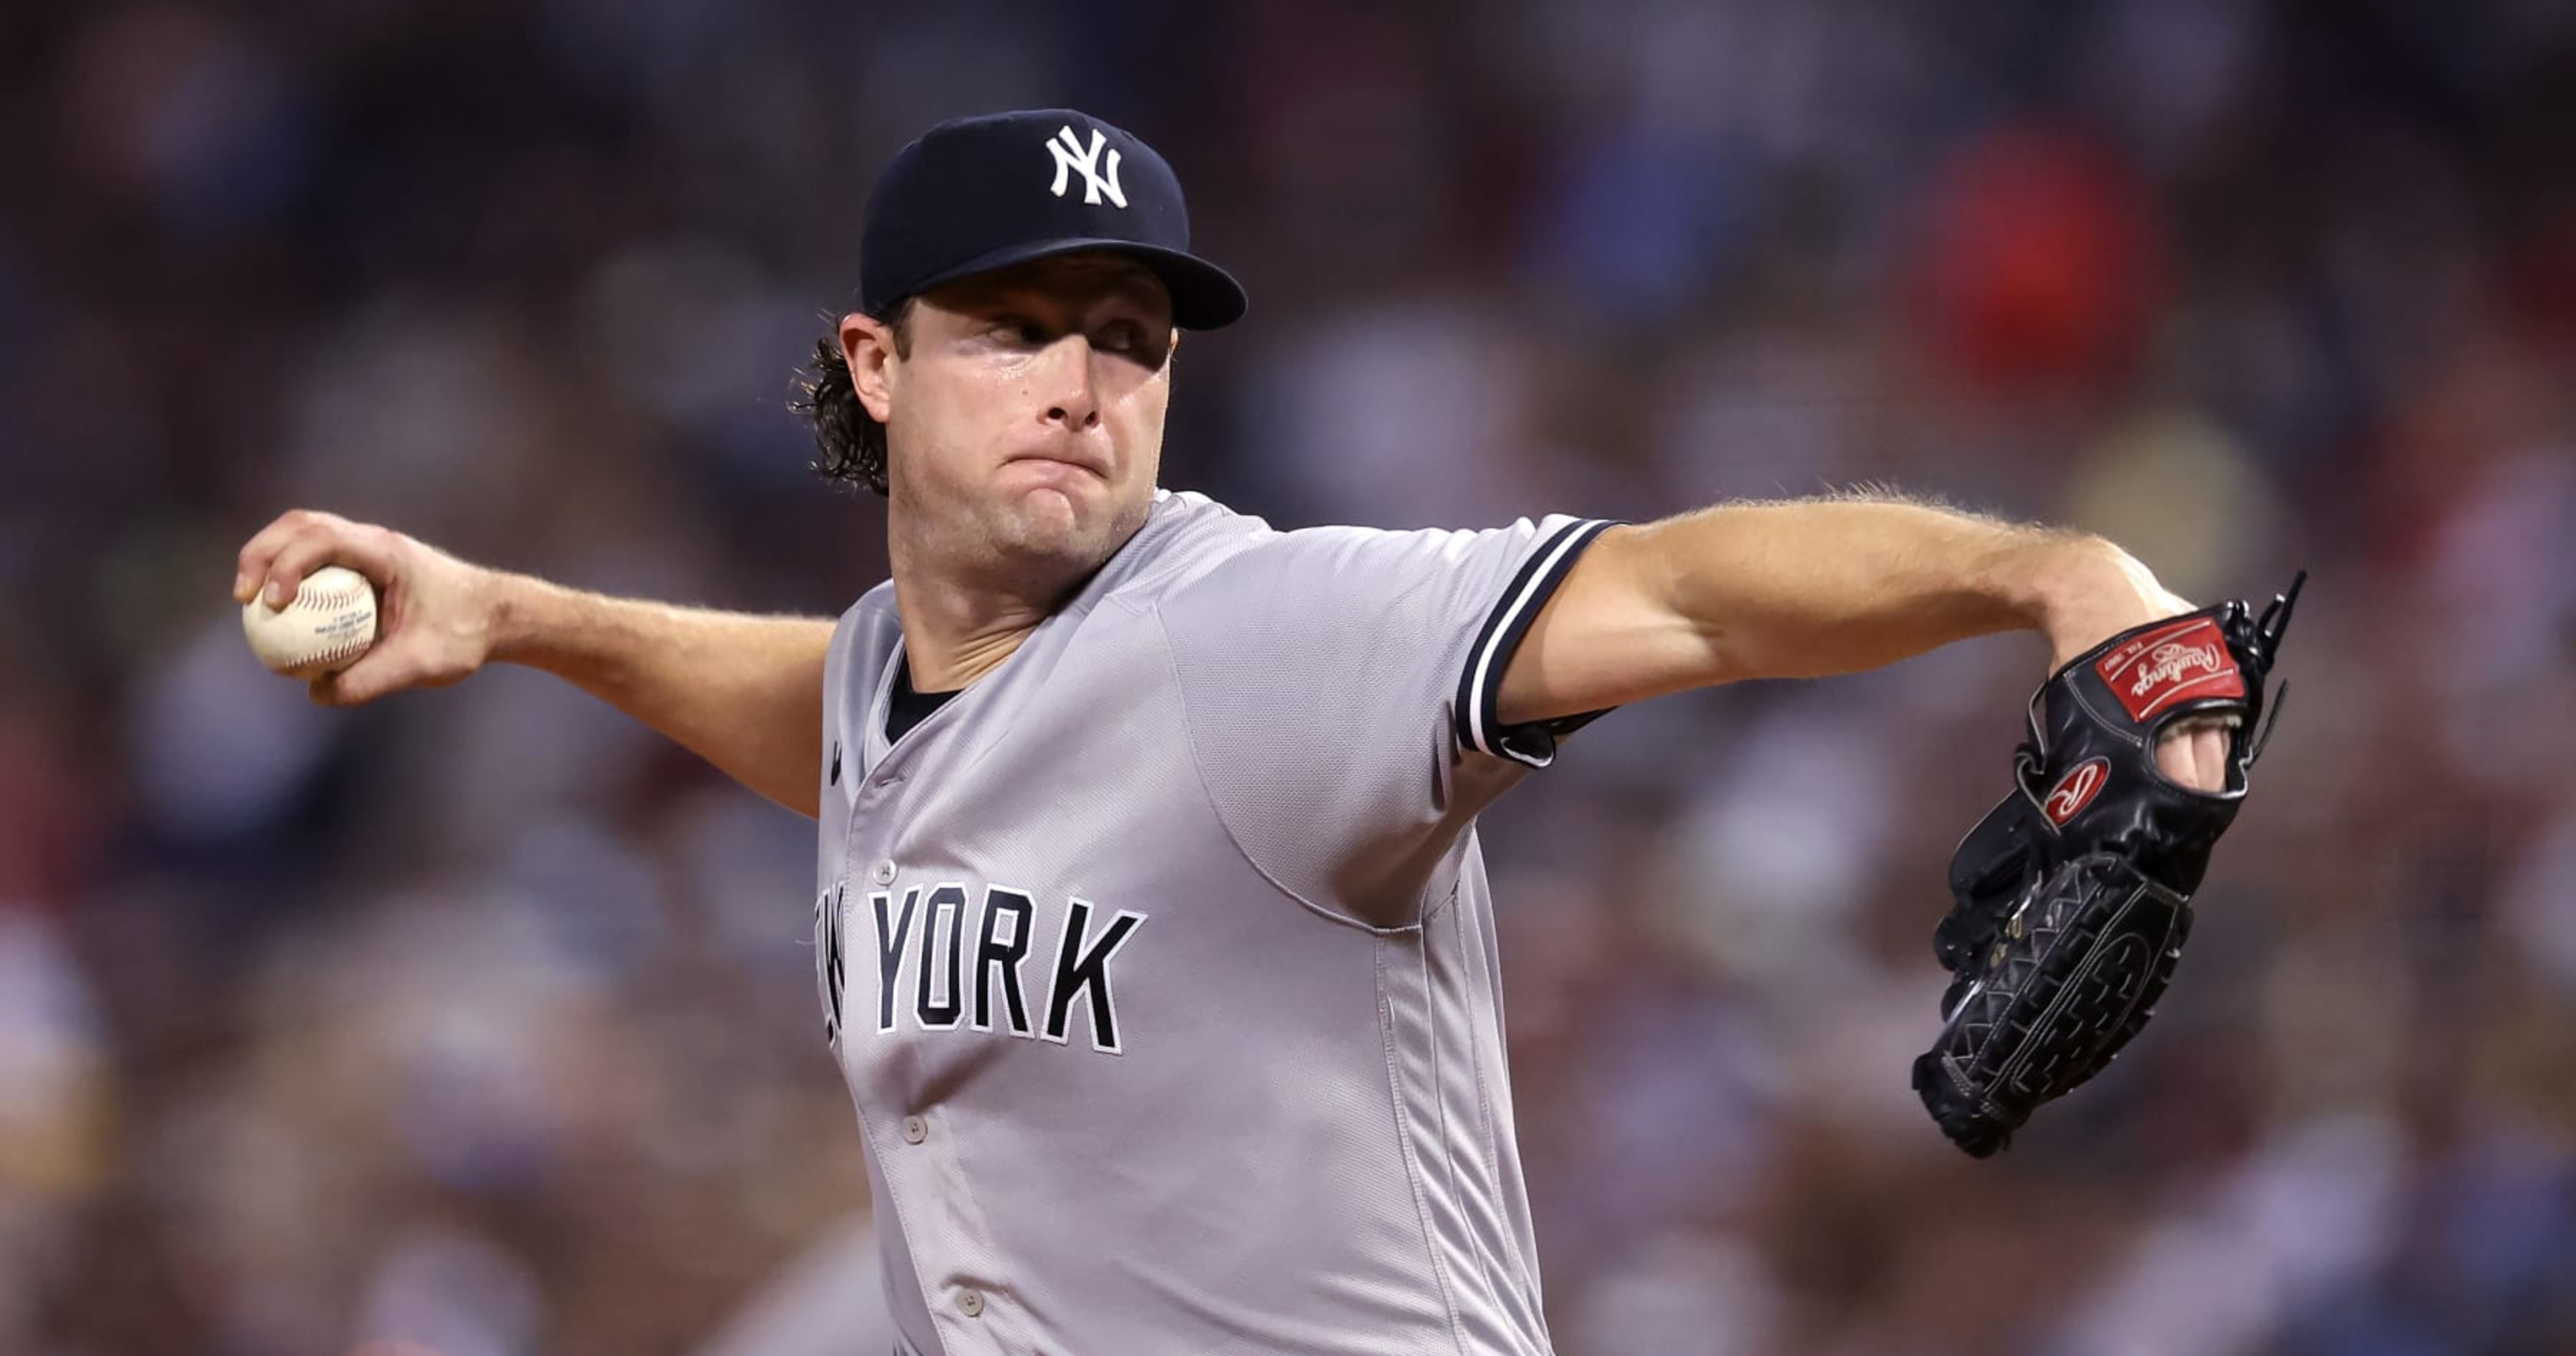 Cole joins Yankees on 9-year deal  Yankees, New york yankees, New york  yankees baseball